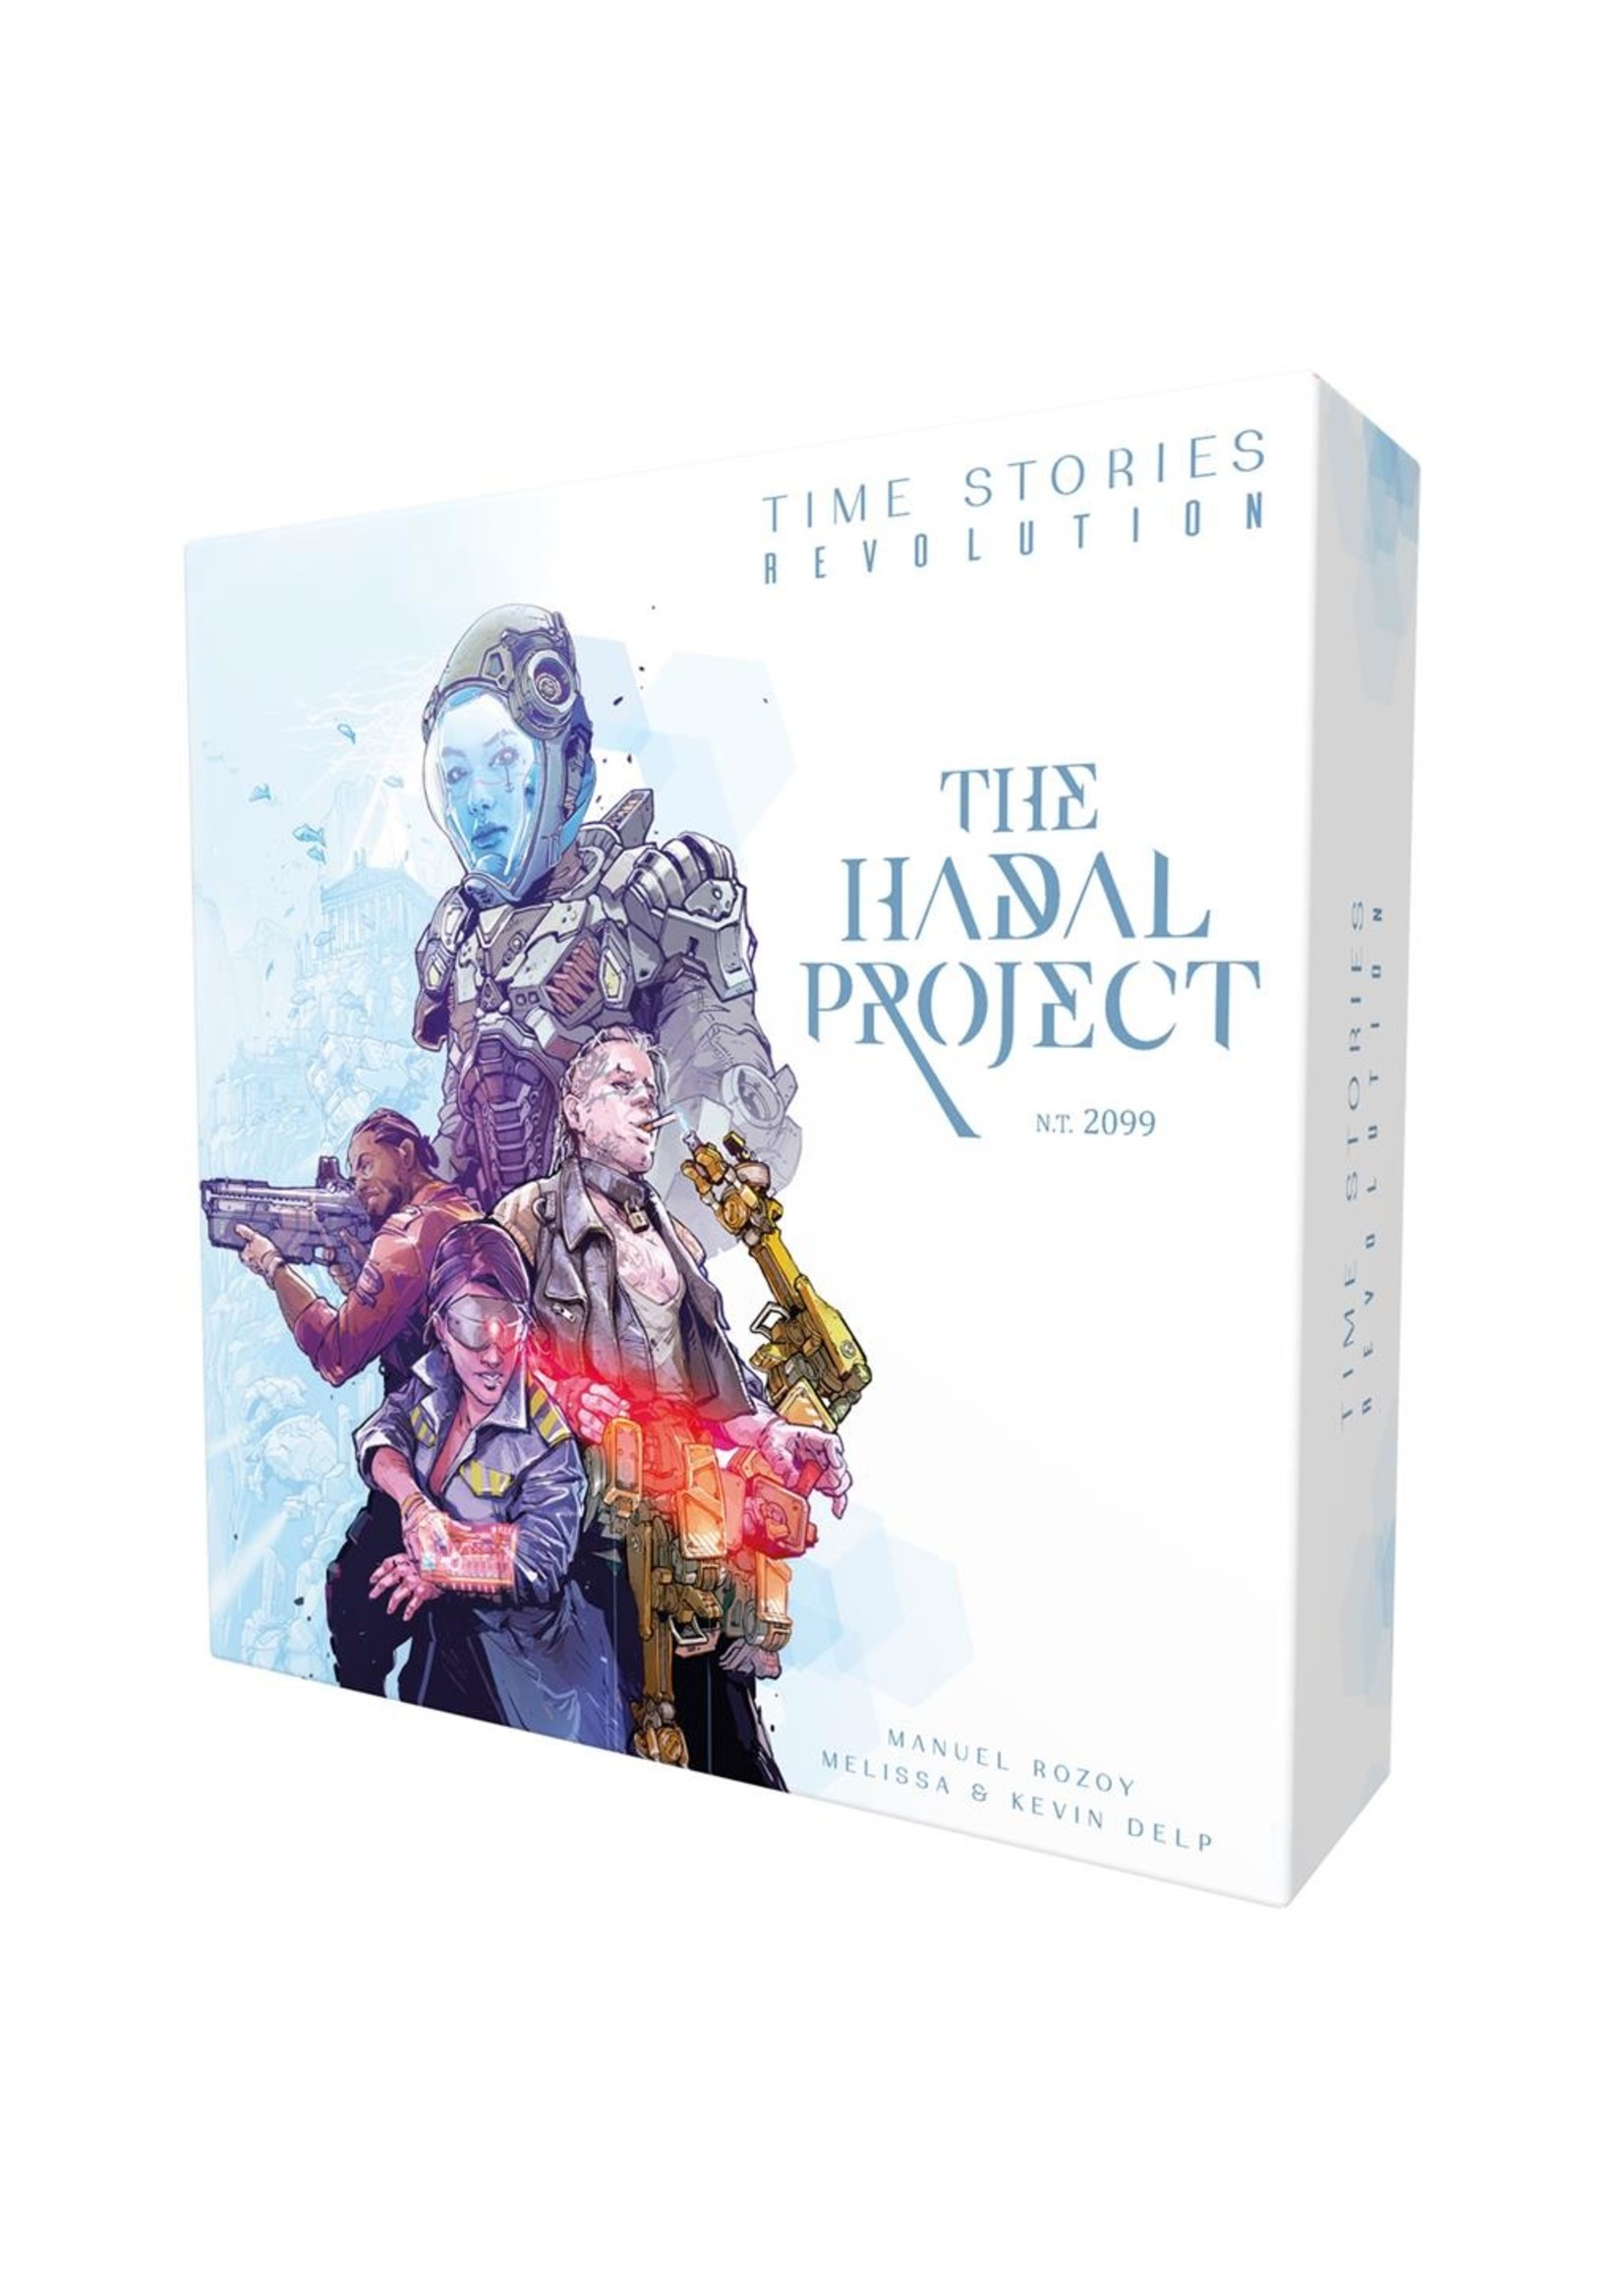 Space Cowboys Time Stories Revolution: The Hadal Project Mission